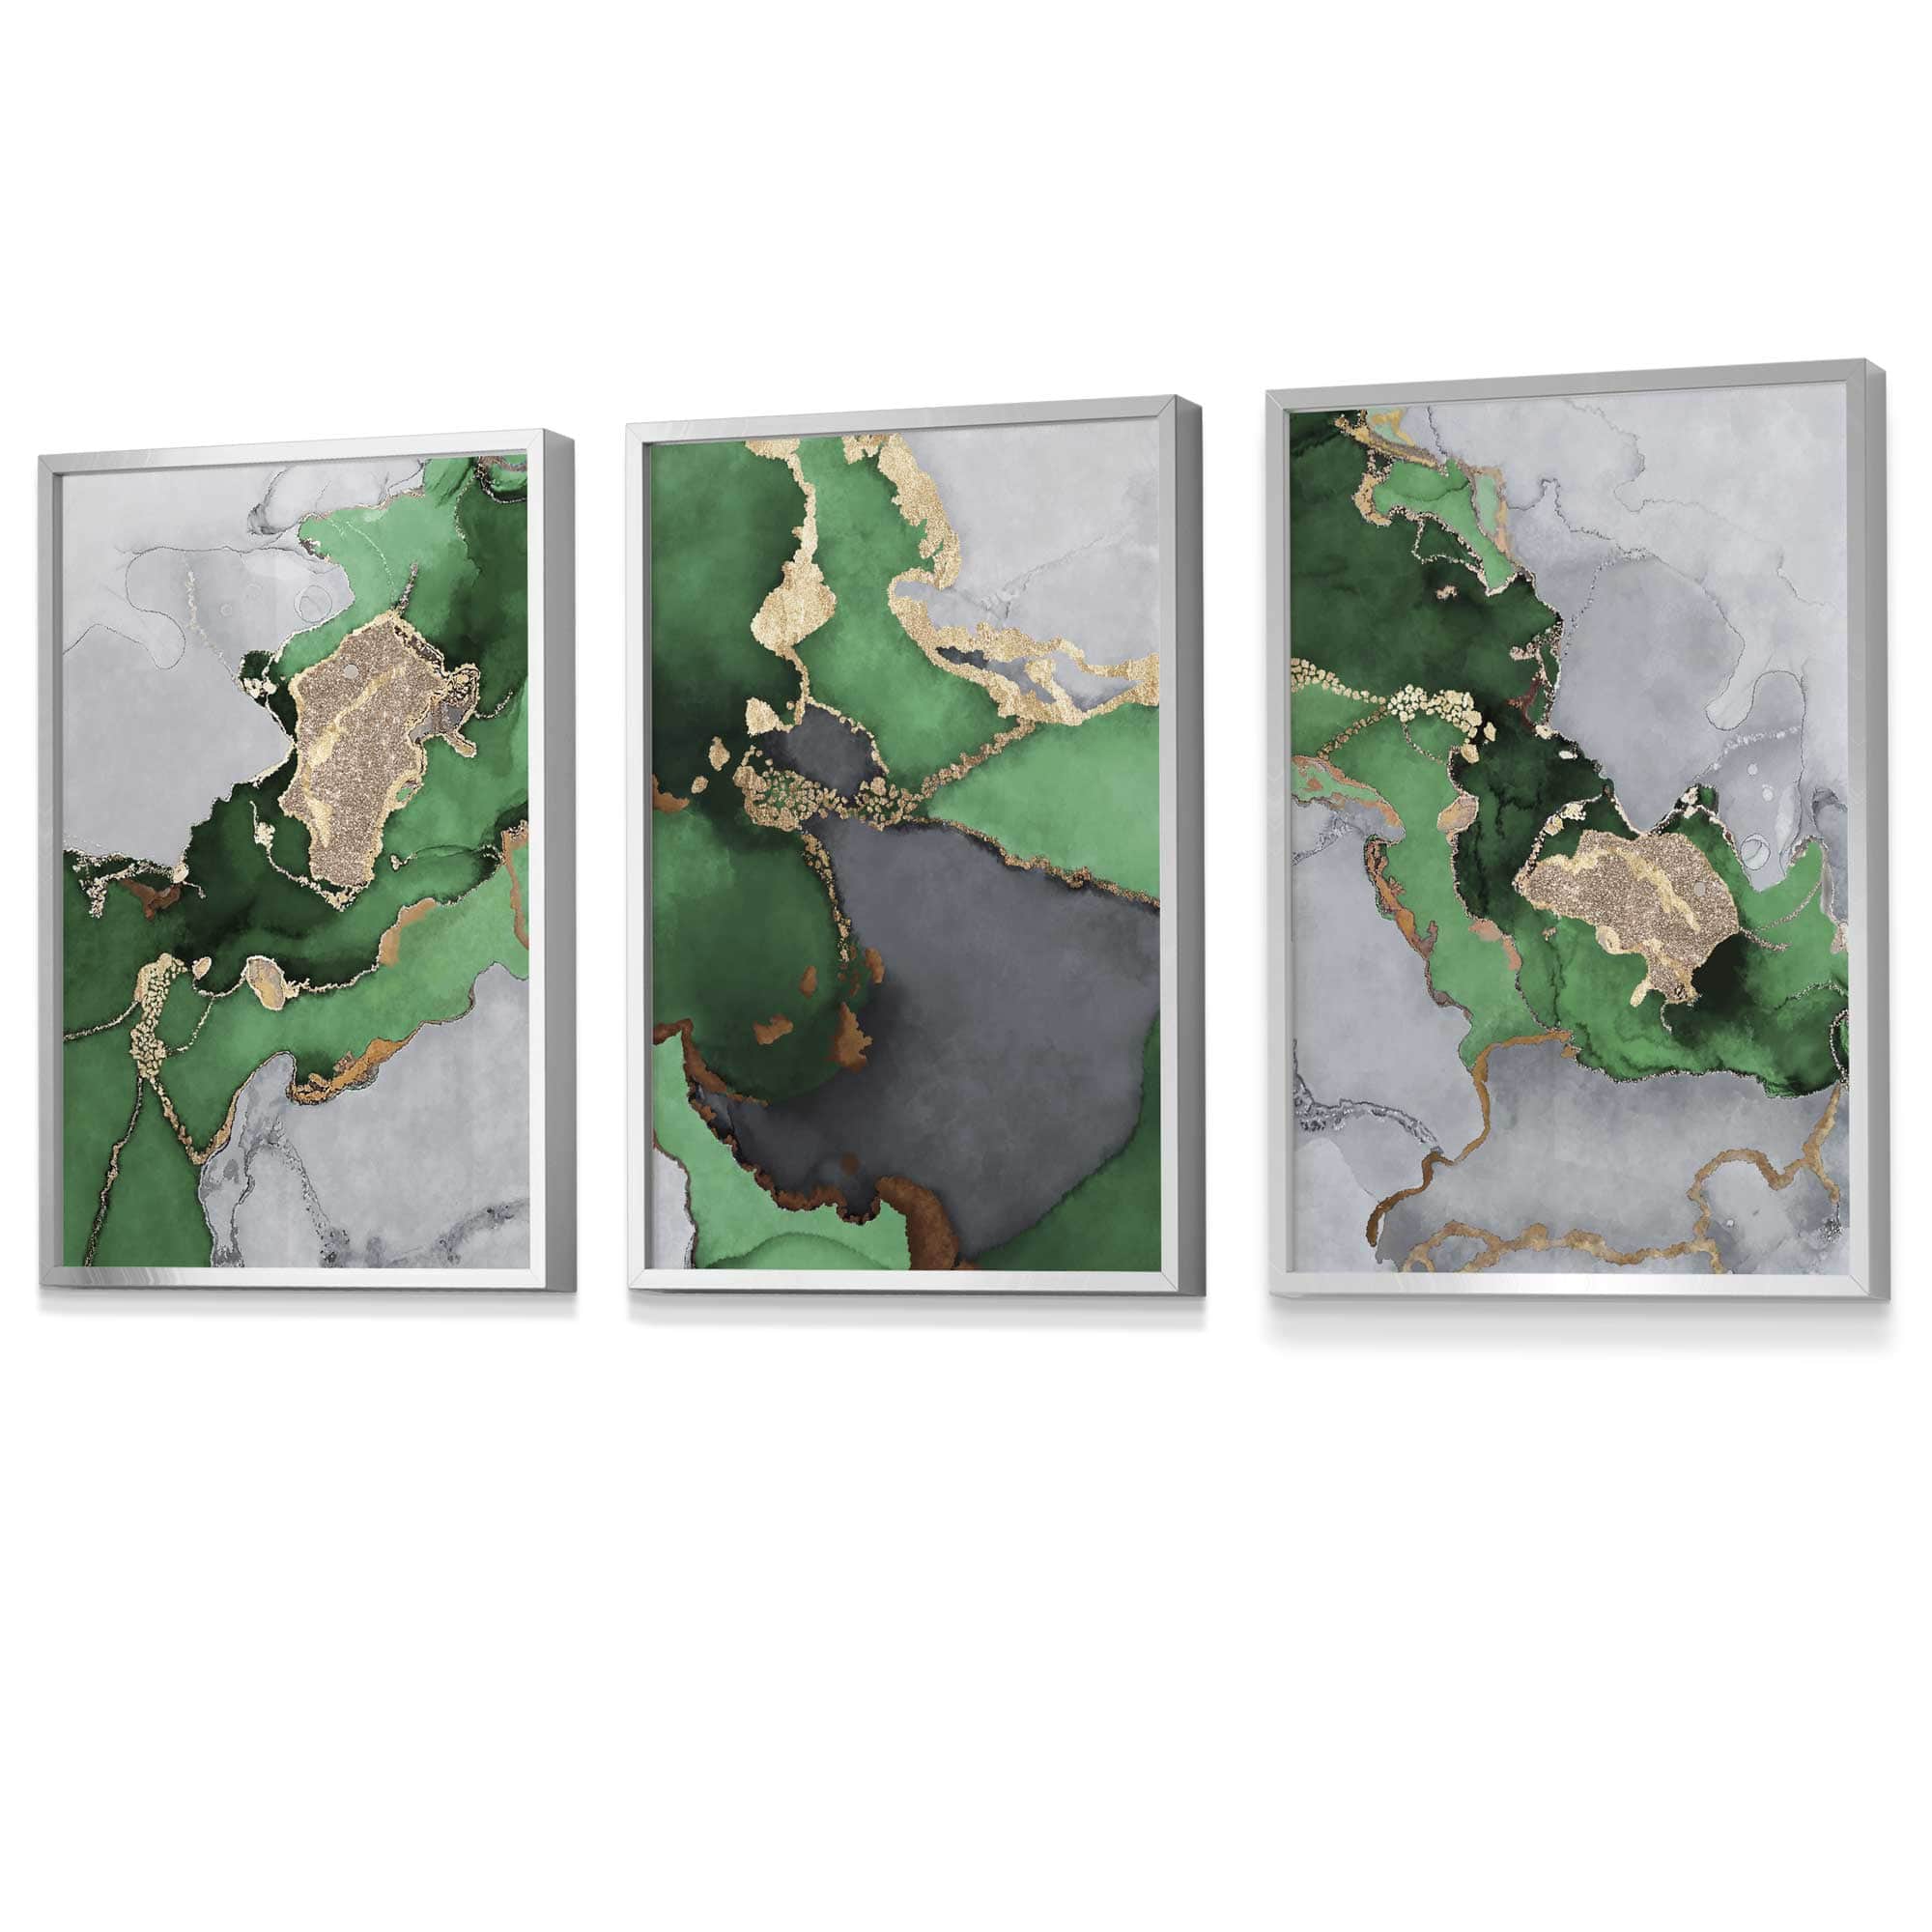 Framed Set of 3 Abstract Art Prints of Paintings Green Grey and Gold | Artze Wall Art UK